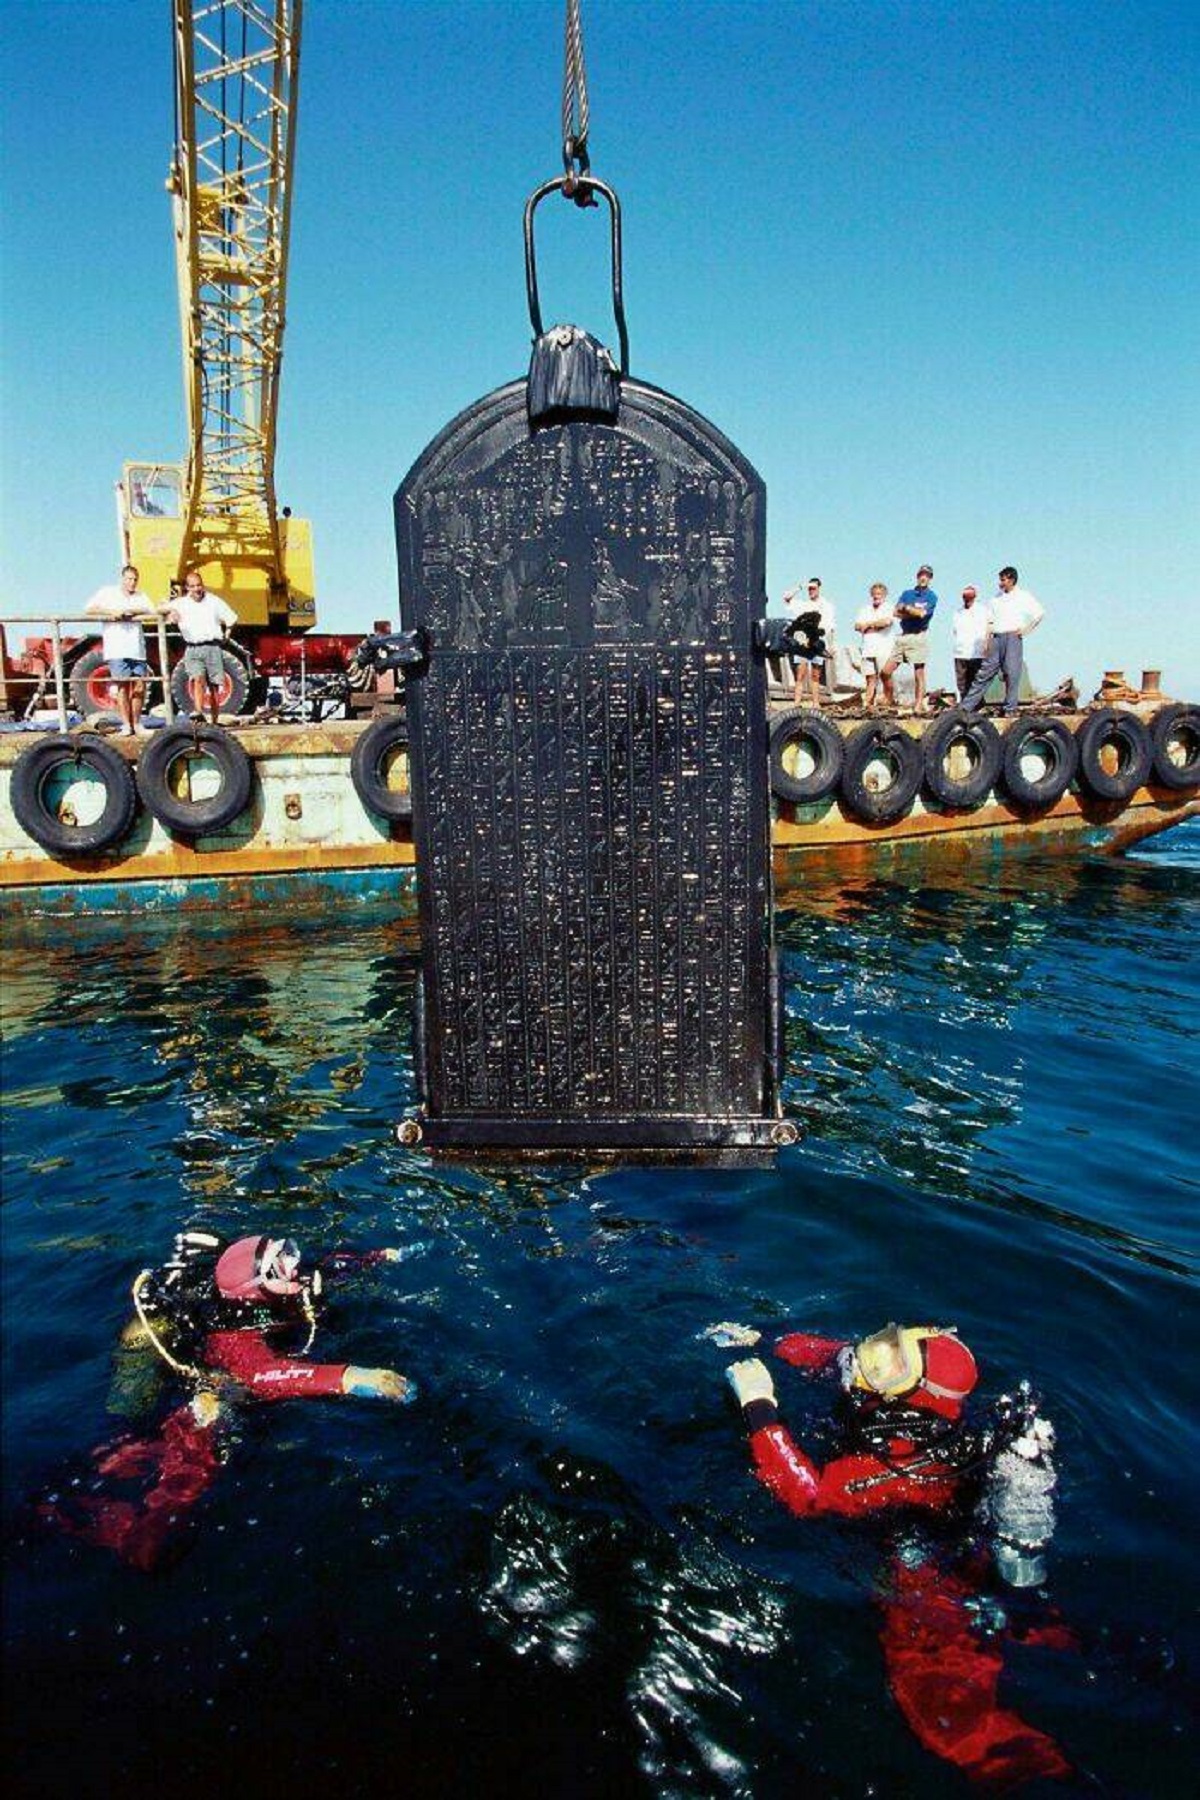 "Thonis-Heracleion Was One Of Egypt's Greatest Ports, But It Slowly Submerged Into The Sea From C.100 Bce-800 Ce"